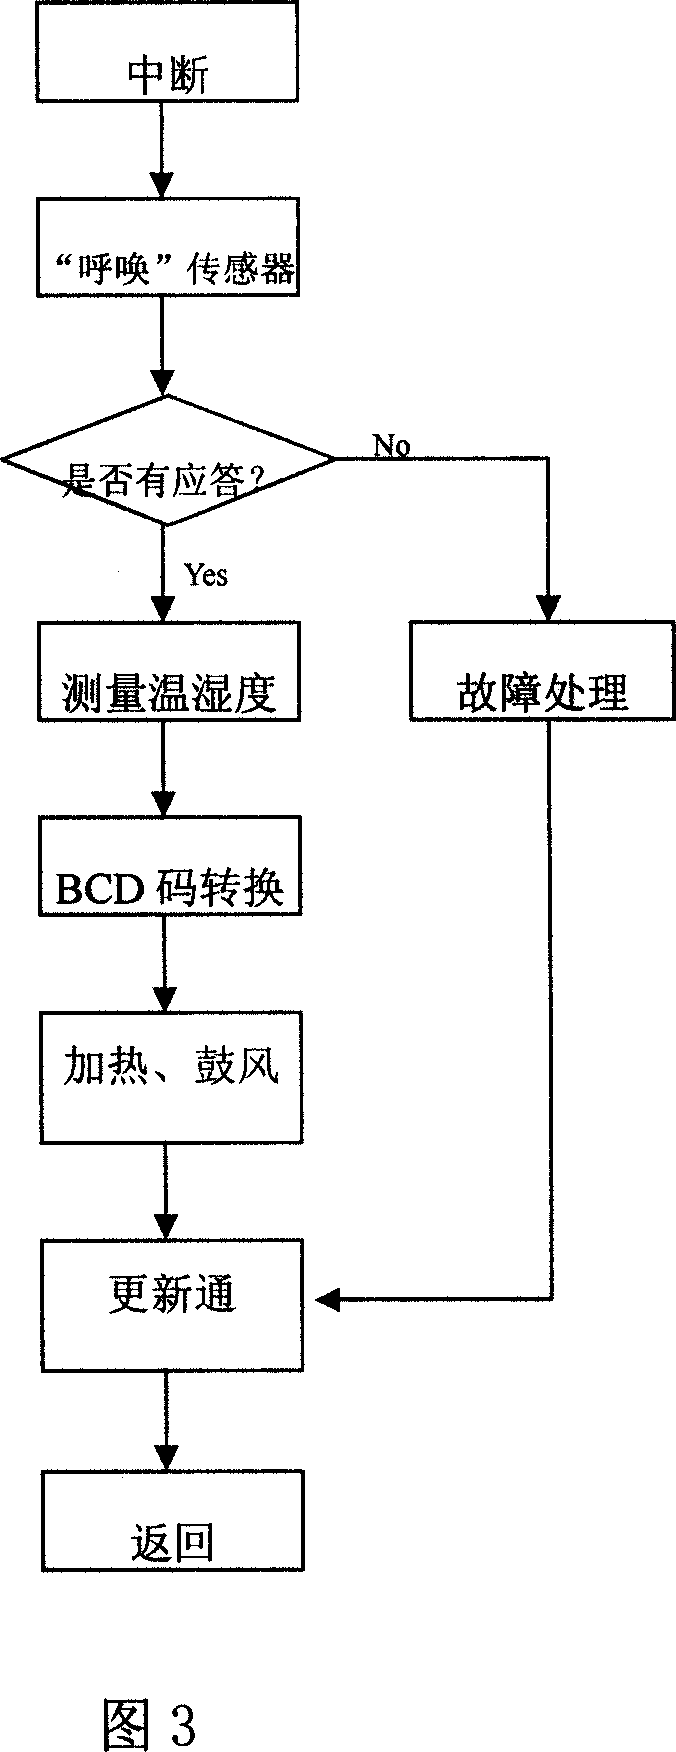 Embedded type software system of intelligent temperature and humidity controller for distribution system and the software design method